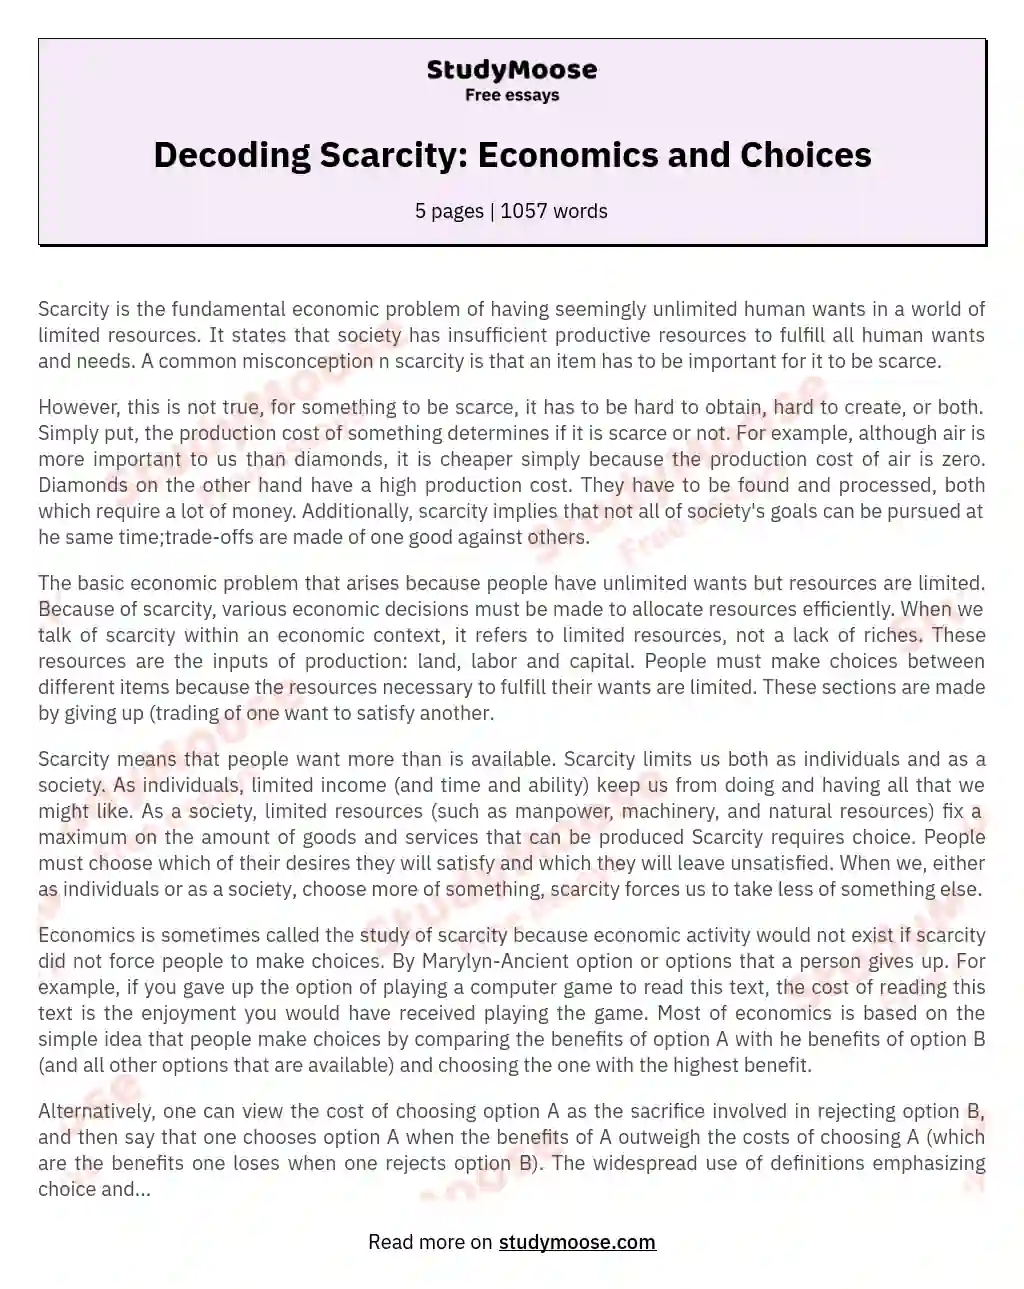 Decoding Scarcity: Economics and Choices essay